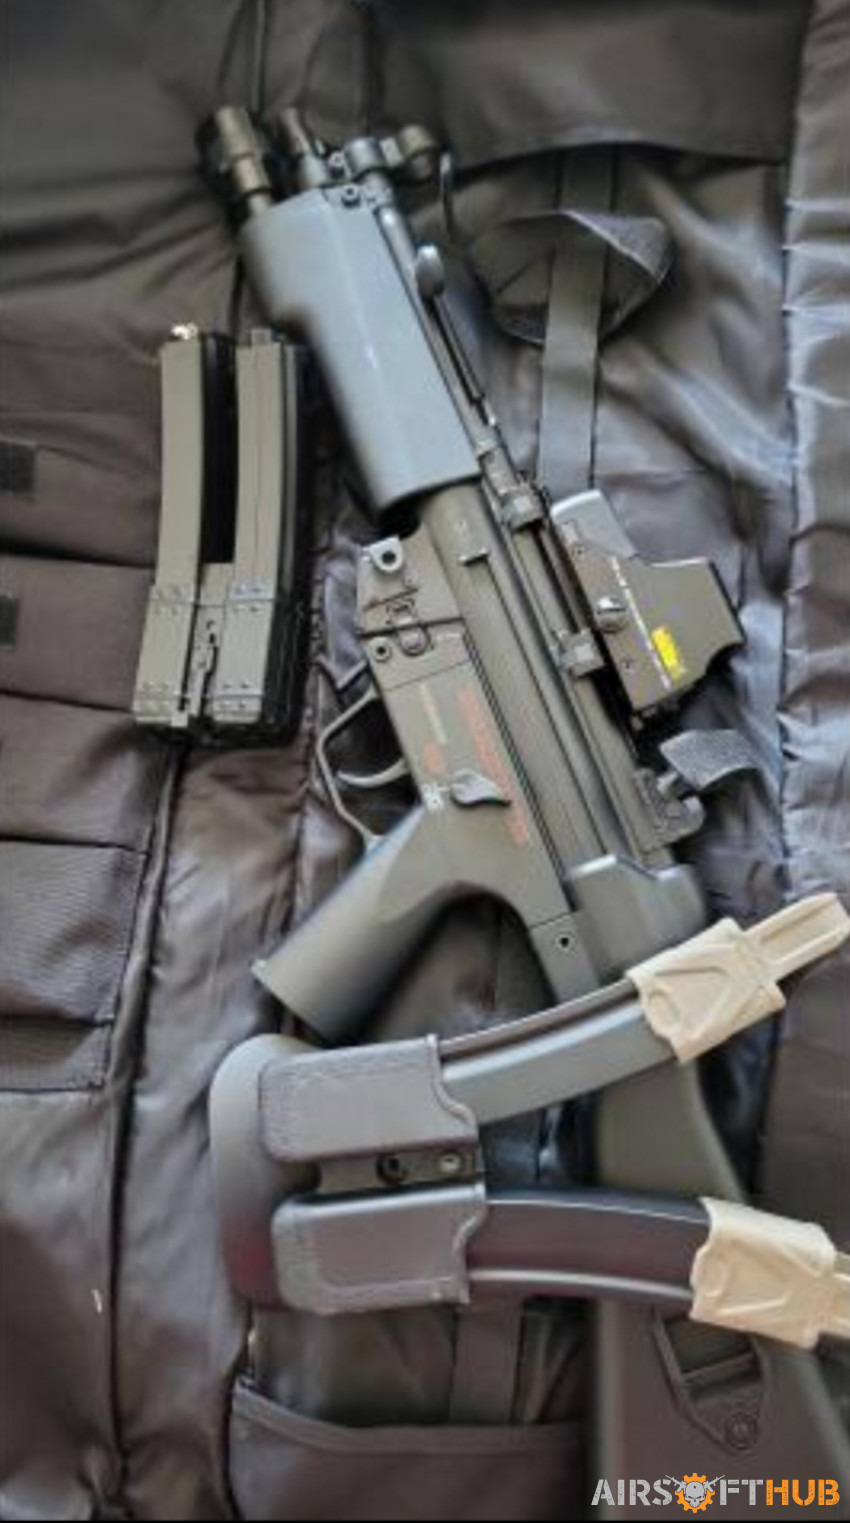 JG MP5 Upgraded - Used airsoft equipment